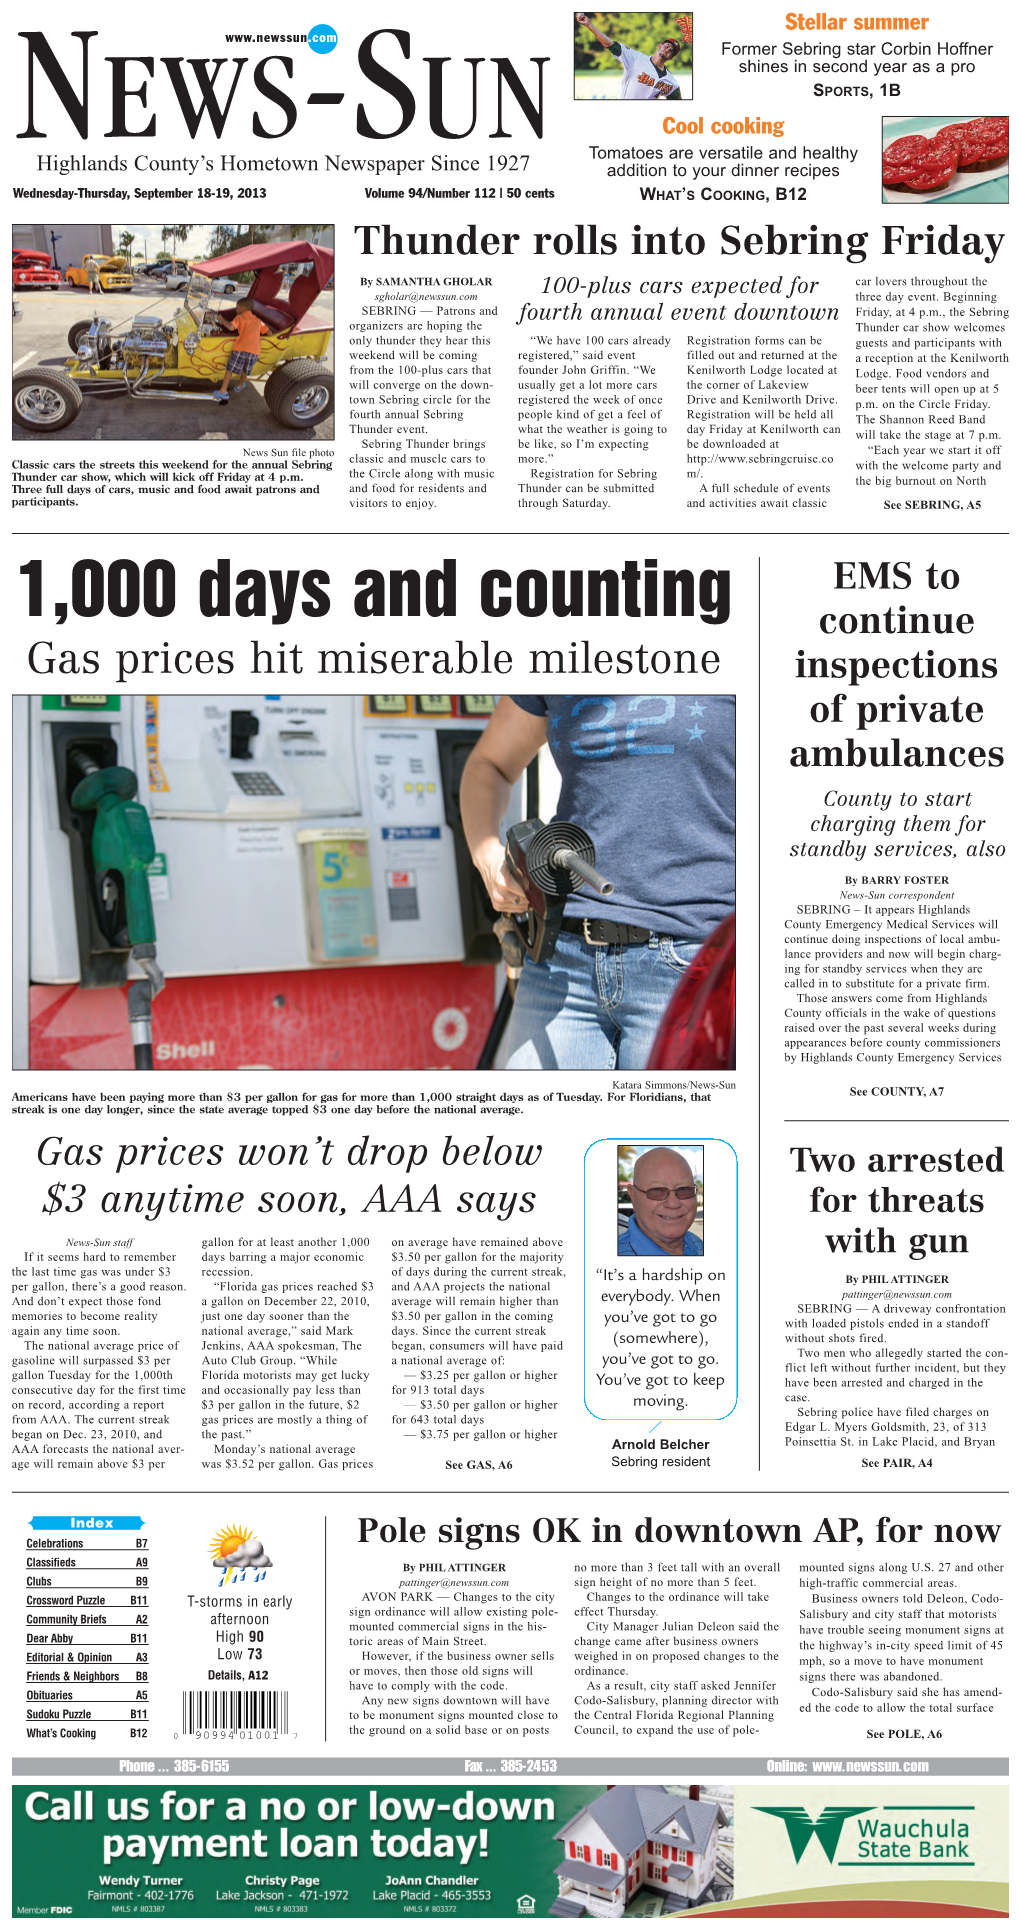 1,000 Days and Counting Continue Gas Prices Hit Miserable Milestone Inspections of Private Ambulances County to Start Charging Them for Standby Services, Also